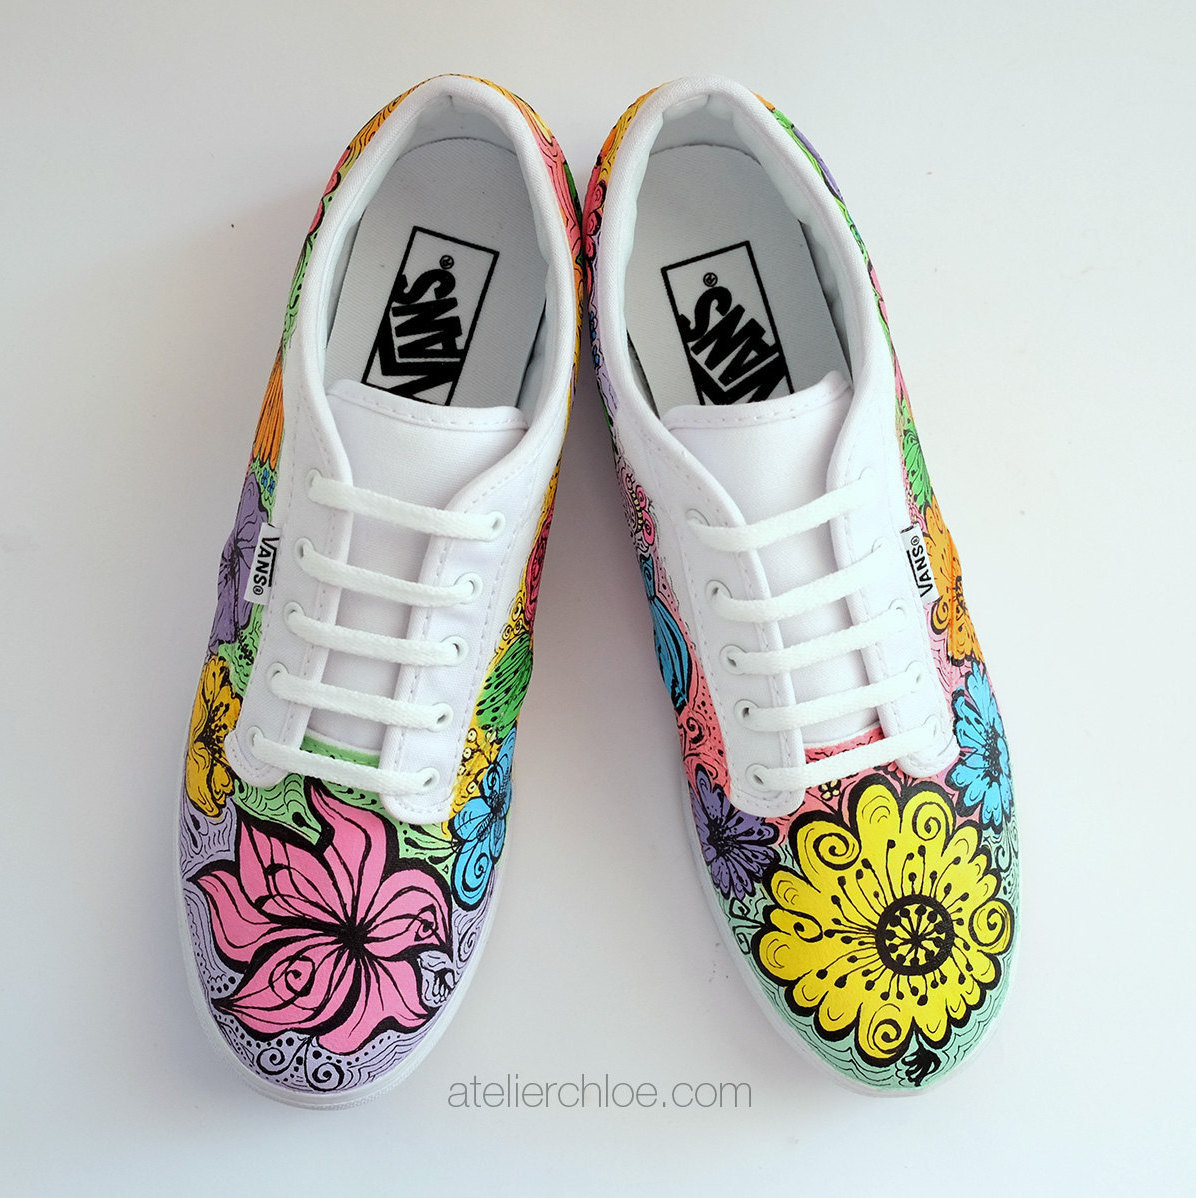 Wedding Vans Shoes
 Custom hand painted Vans floral personalized shoes wedding